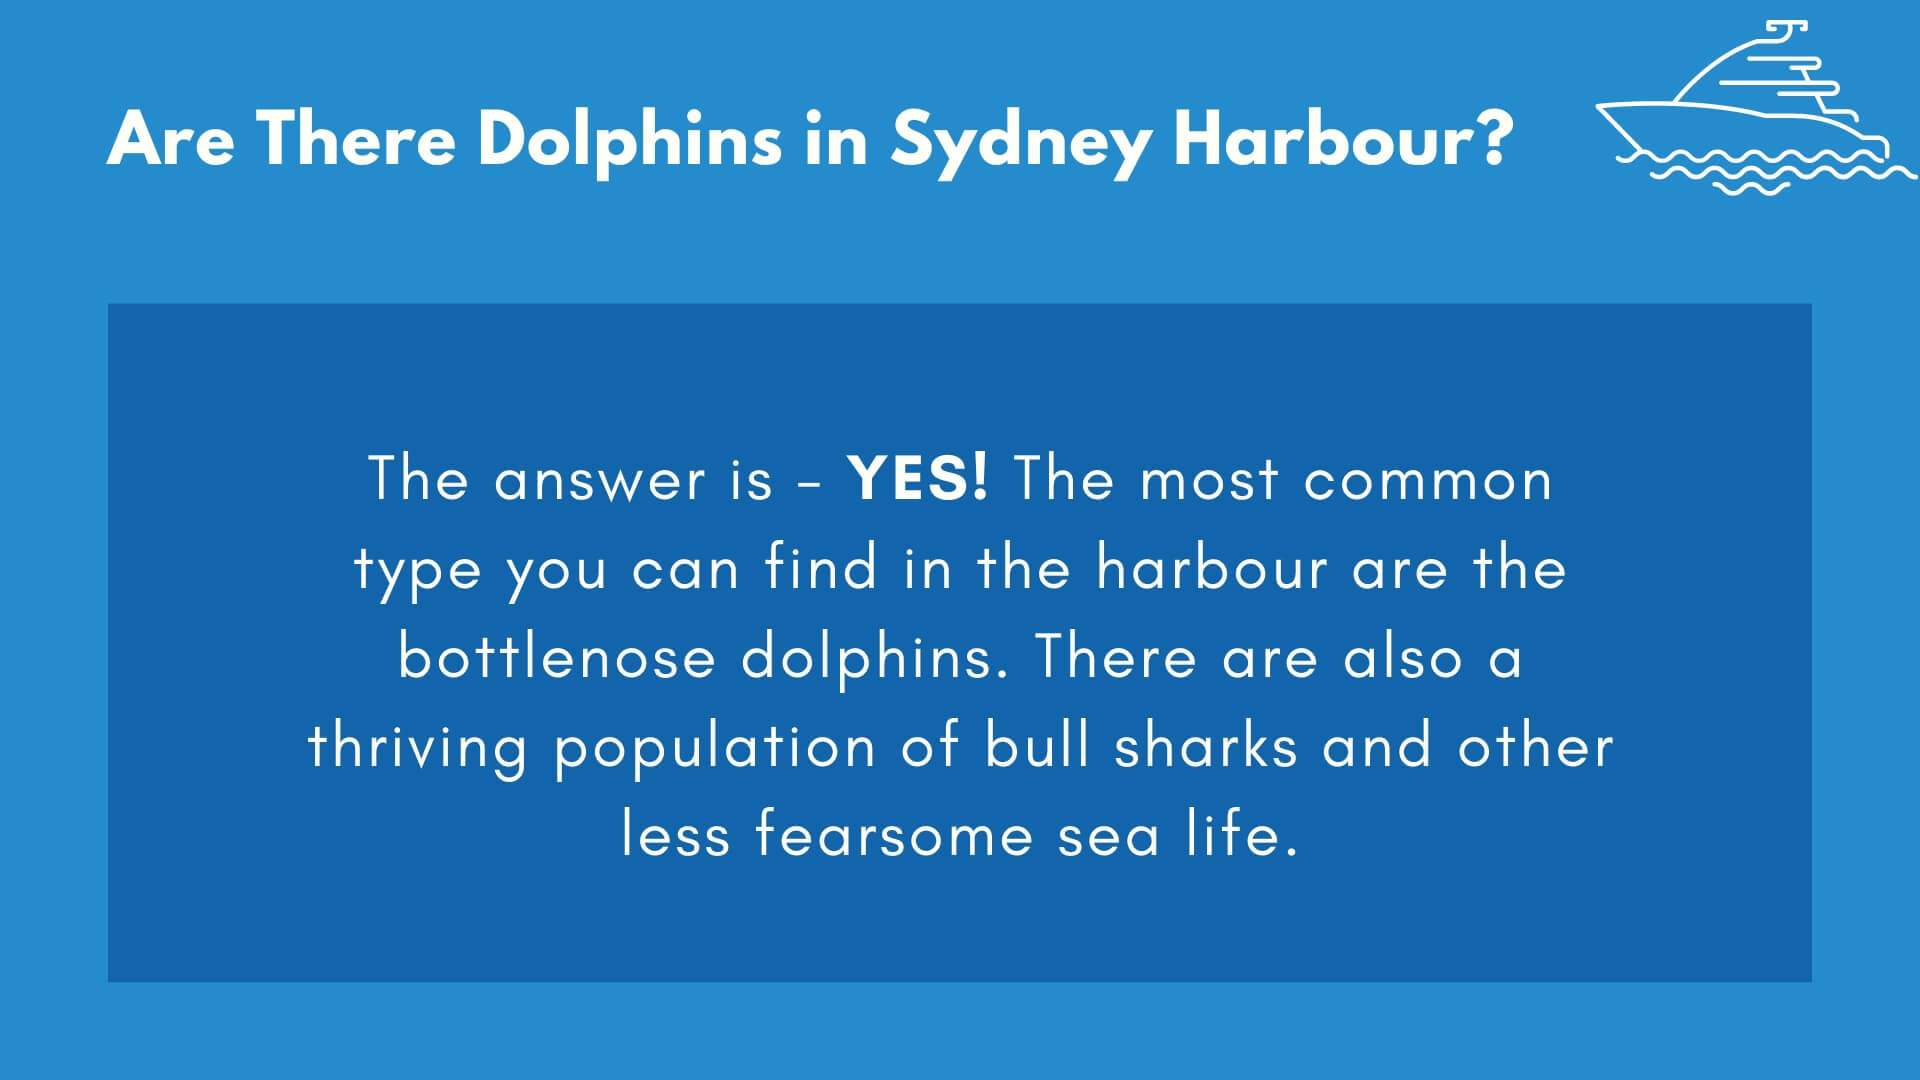 Are There Dolphins in Sydney Harbour Infographic from Sydney Harbour Escapes blog